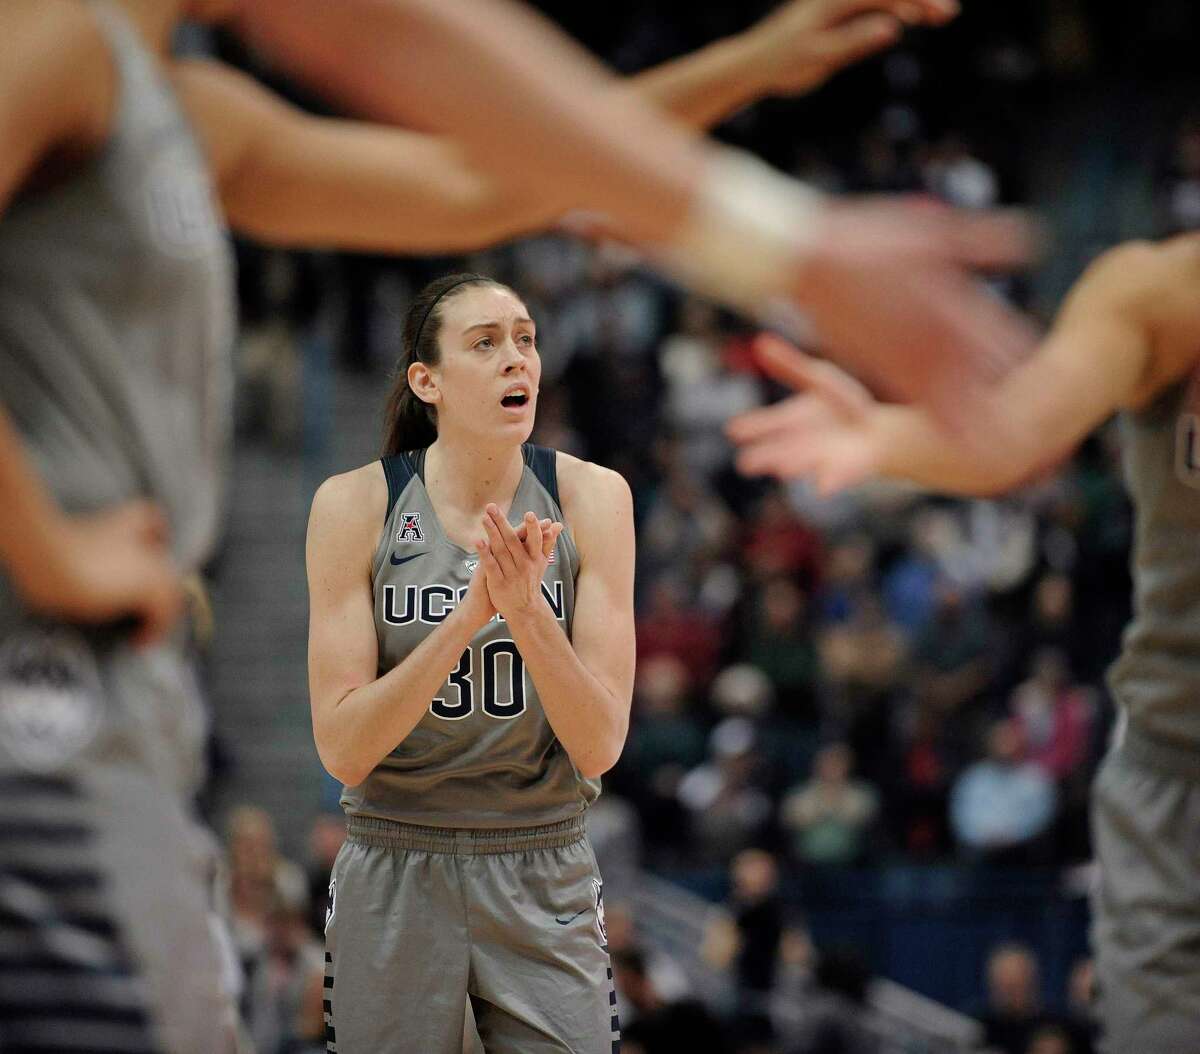 UConn’s Breanna Stewart needs two blocked shots to reach 300 for her career.